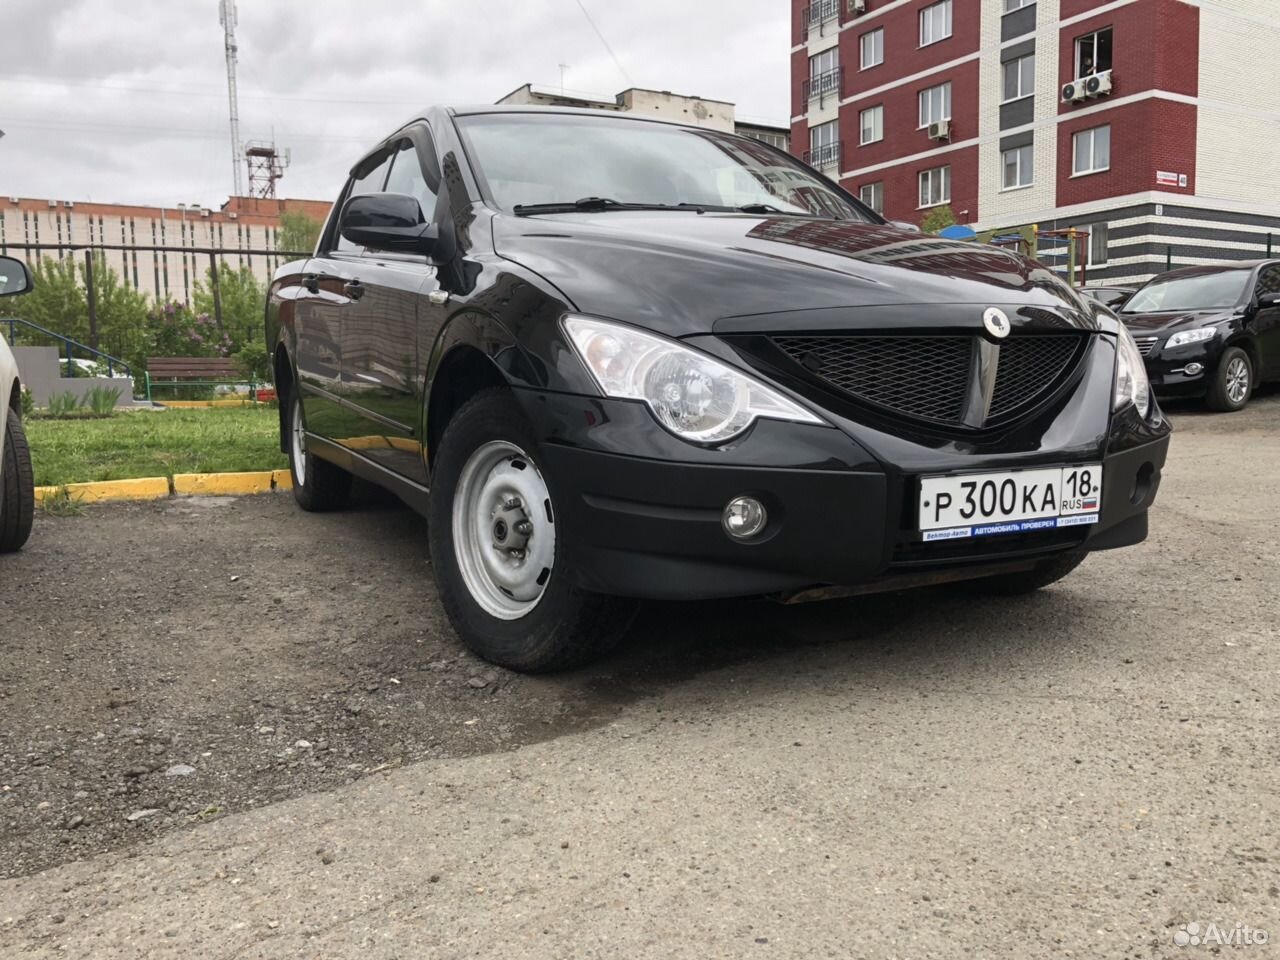 Ssangyong actyon sports 2008 года. Саньенг Актион спорт 2010. SSANGYONG Actyon Sports. Актион спорт 2008. SSANGYONG Actyon Sports 2008.